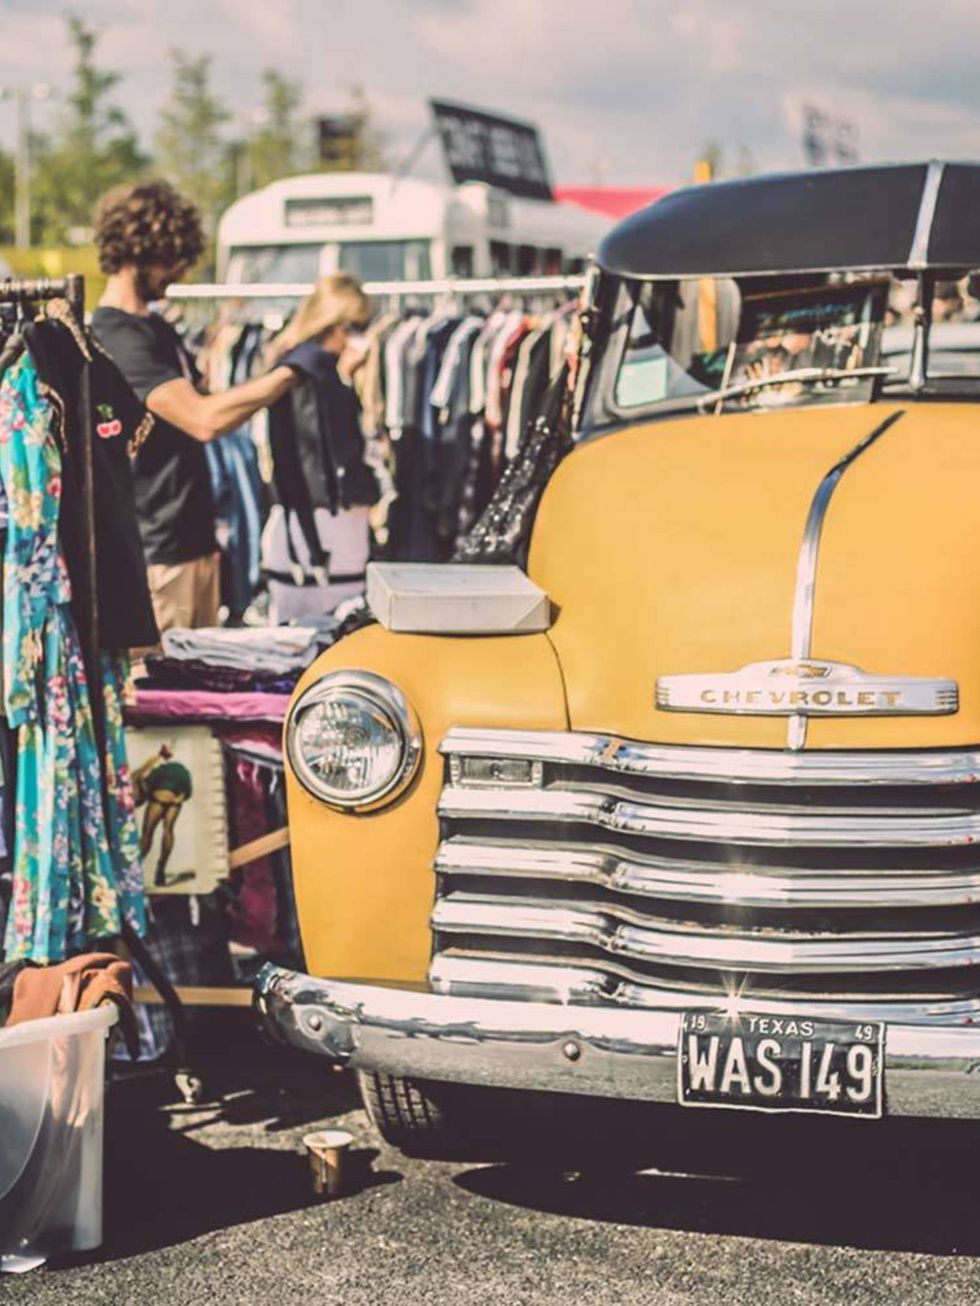 <p>SHOPPING: The Classic Car Boot Sale</p>

<p>Now, we wouldn't ordinarily suggest a day's shopping at a car boot sale. But then, this Kings Cross shindig is no ordinary car boot sale. This is a chance to shop covetable vintage fashion, retro-chic access